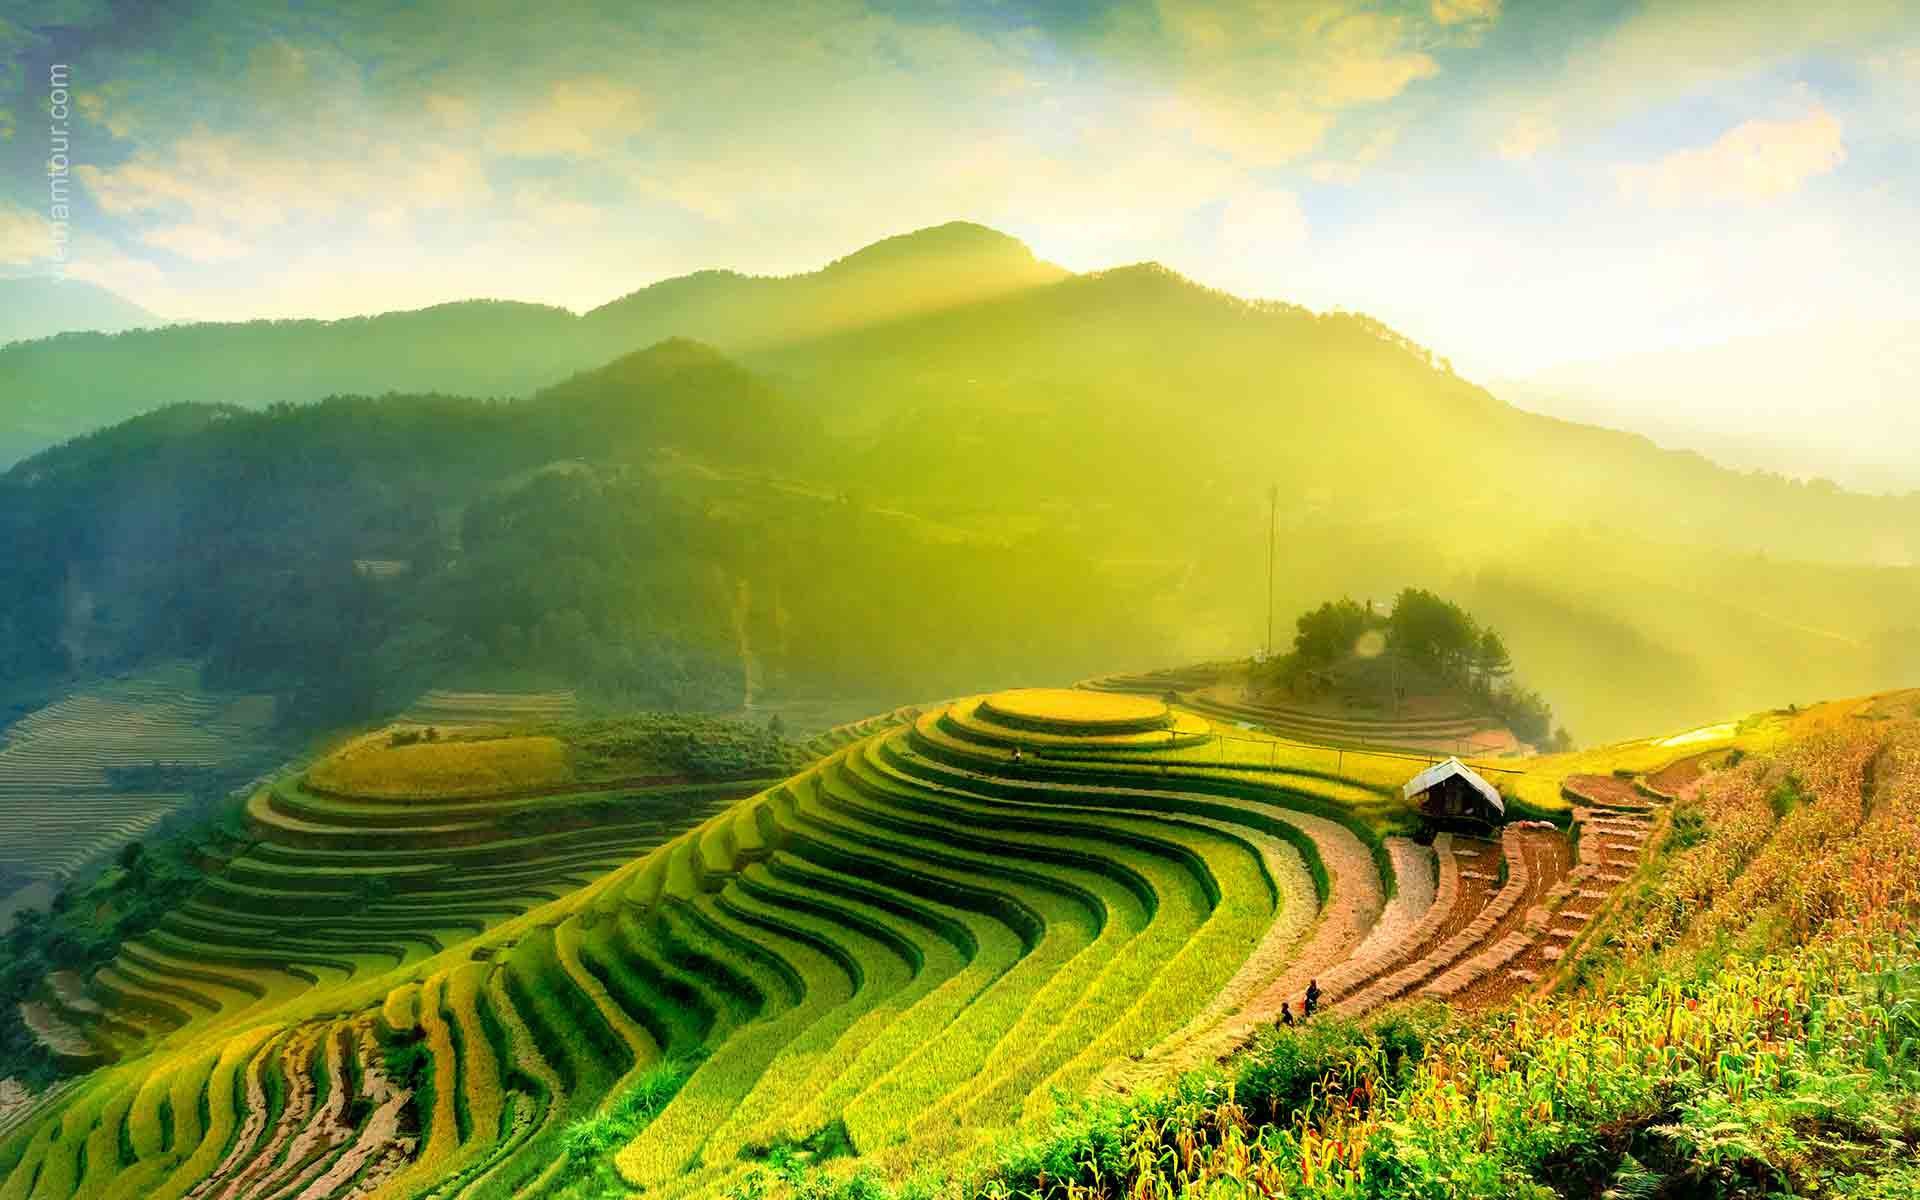 Immerse yourself in the Golden rice in Mu Cang Chai 